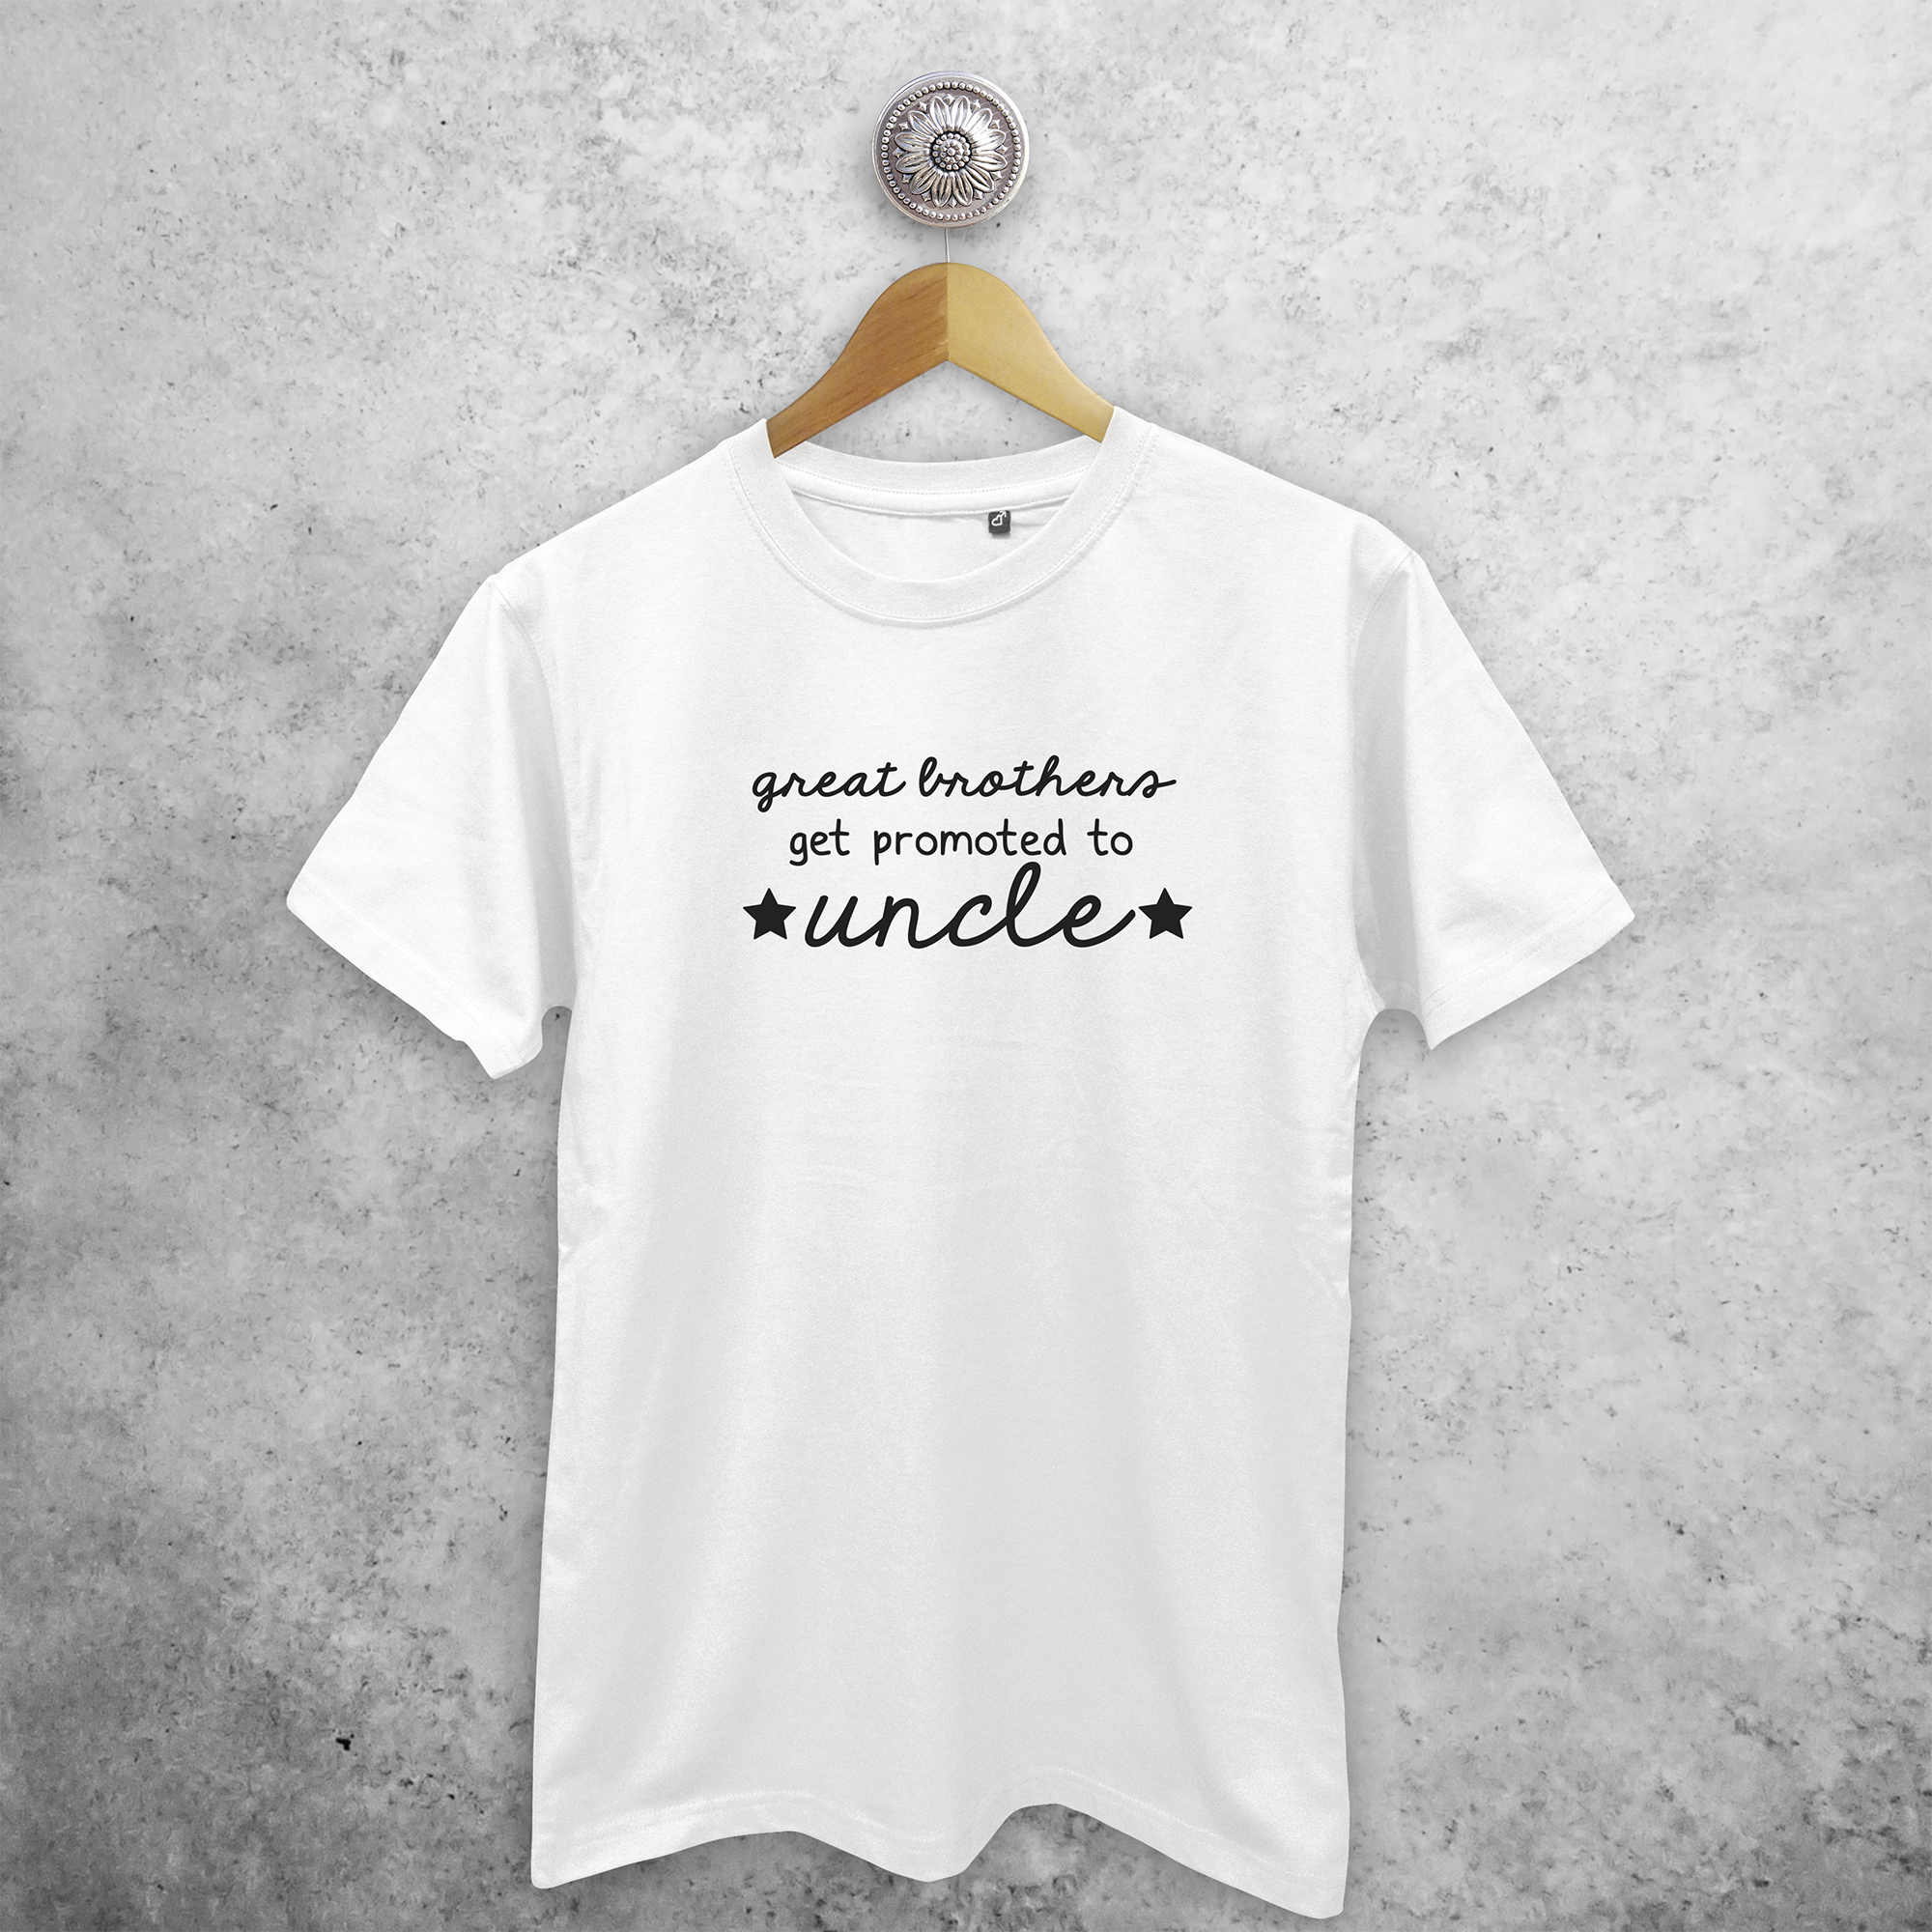 'Great brothers get promoted to uncle' adult shirt